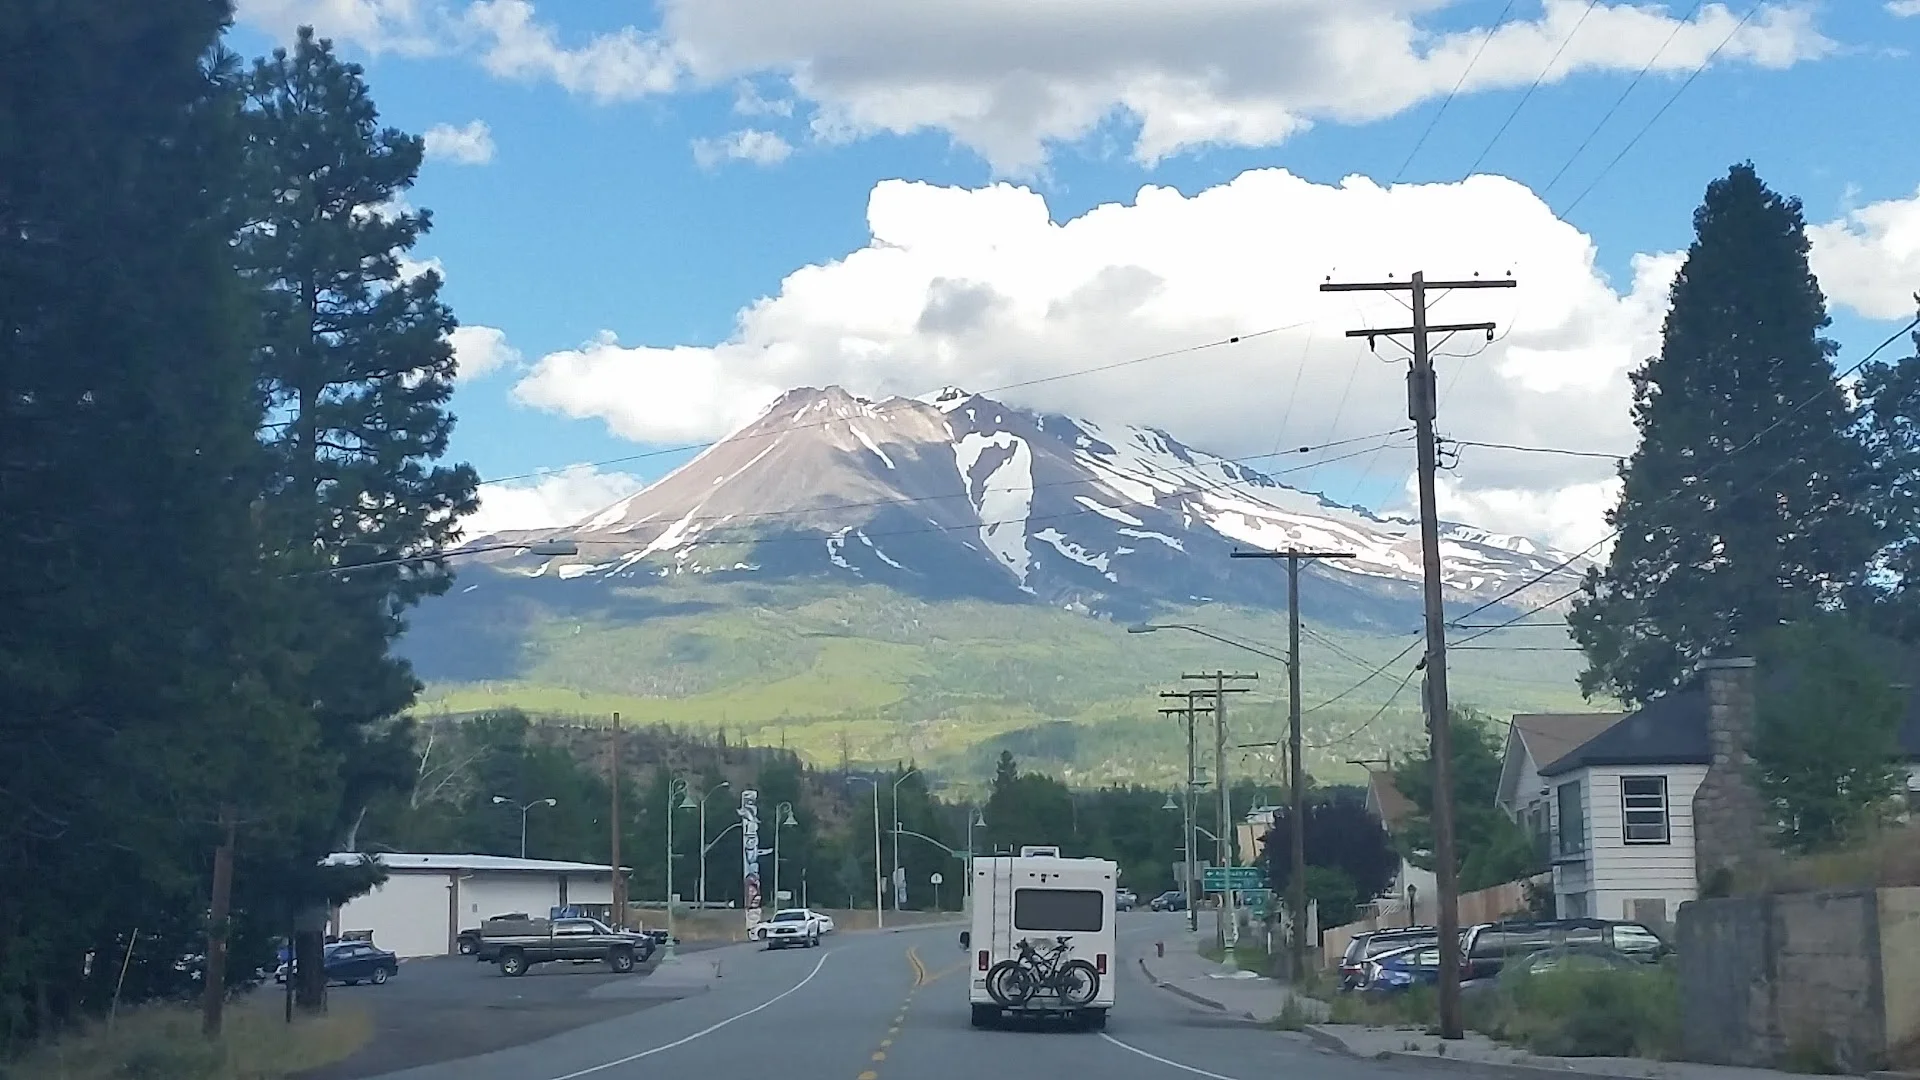 view of Mt Shasta from downtown Weed